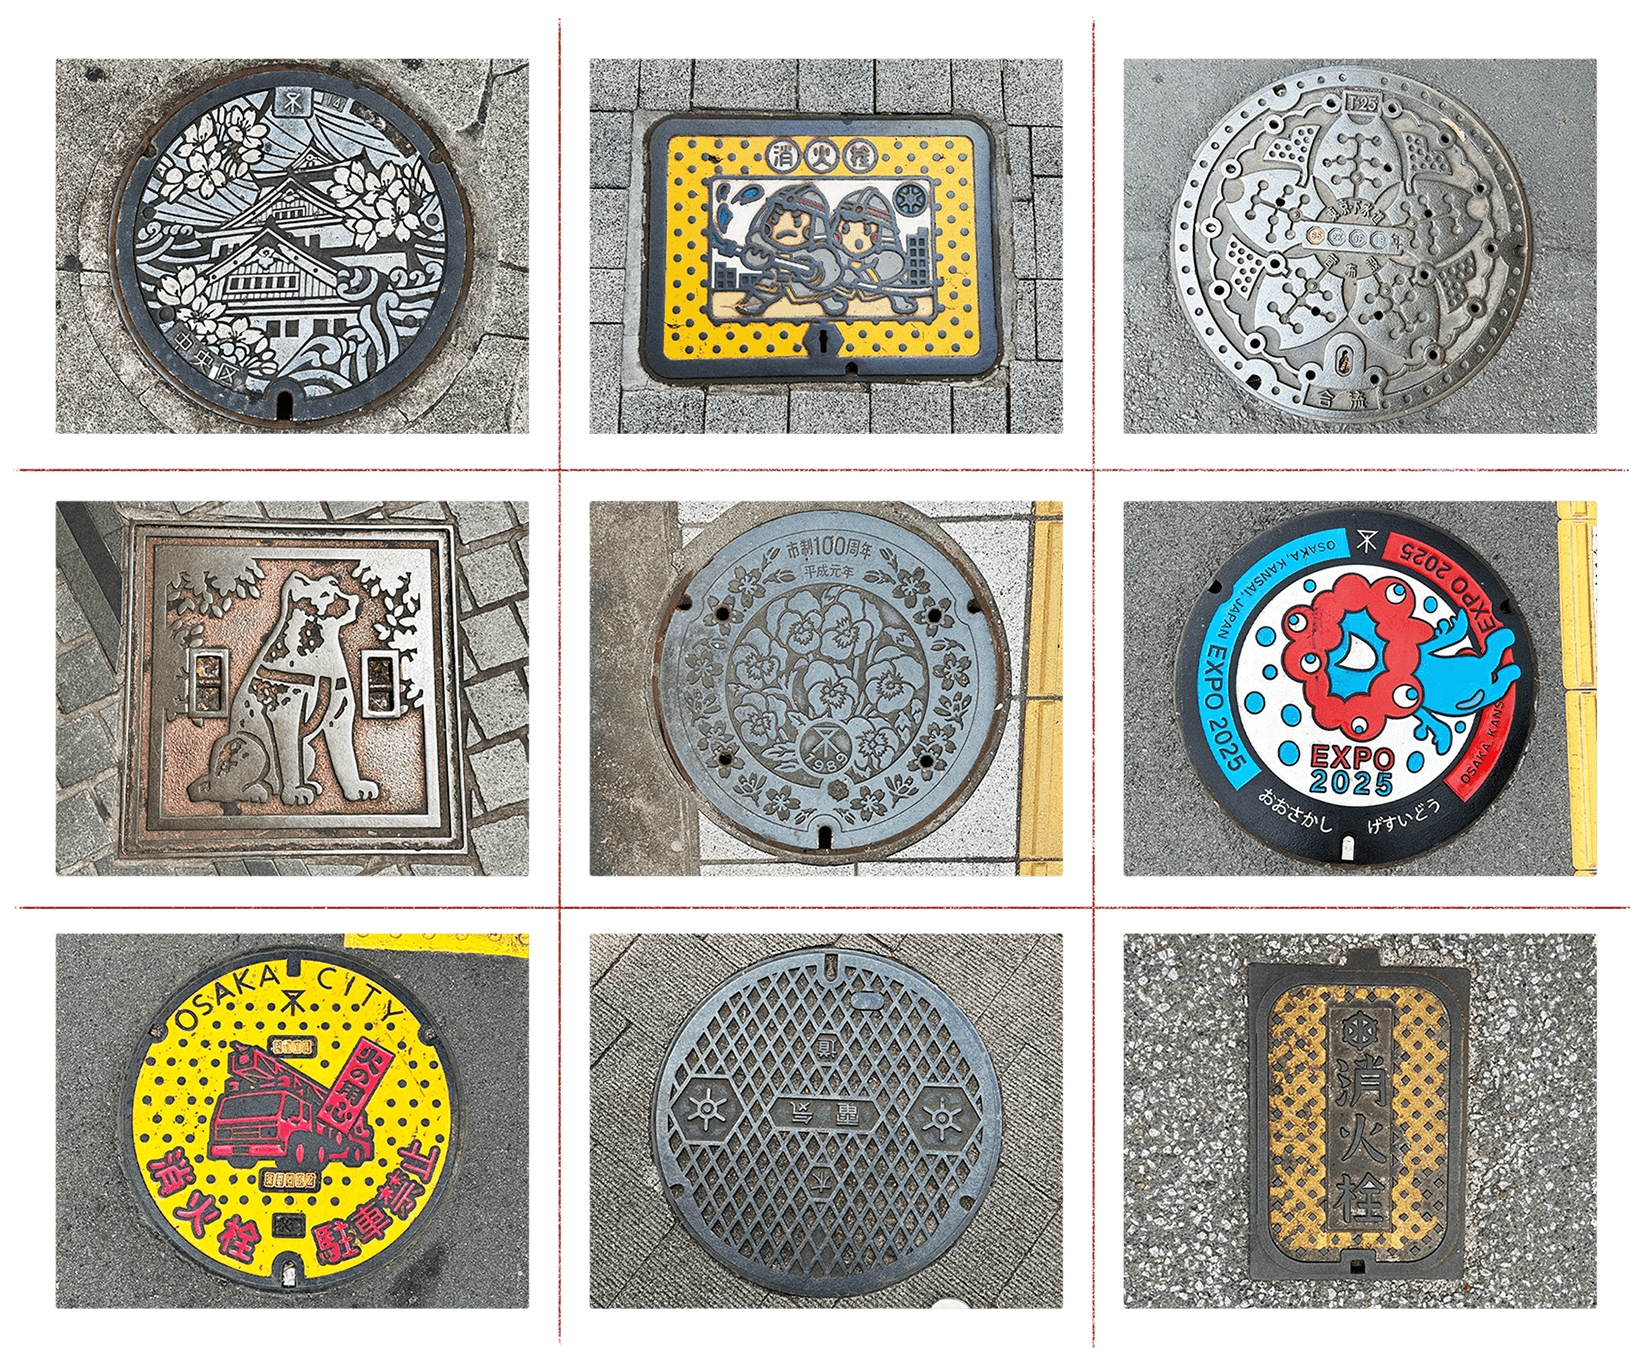 Photo grid of Japanese maintenance hole cover designs